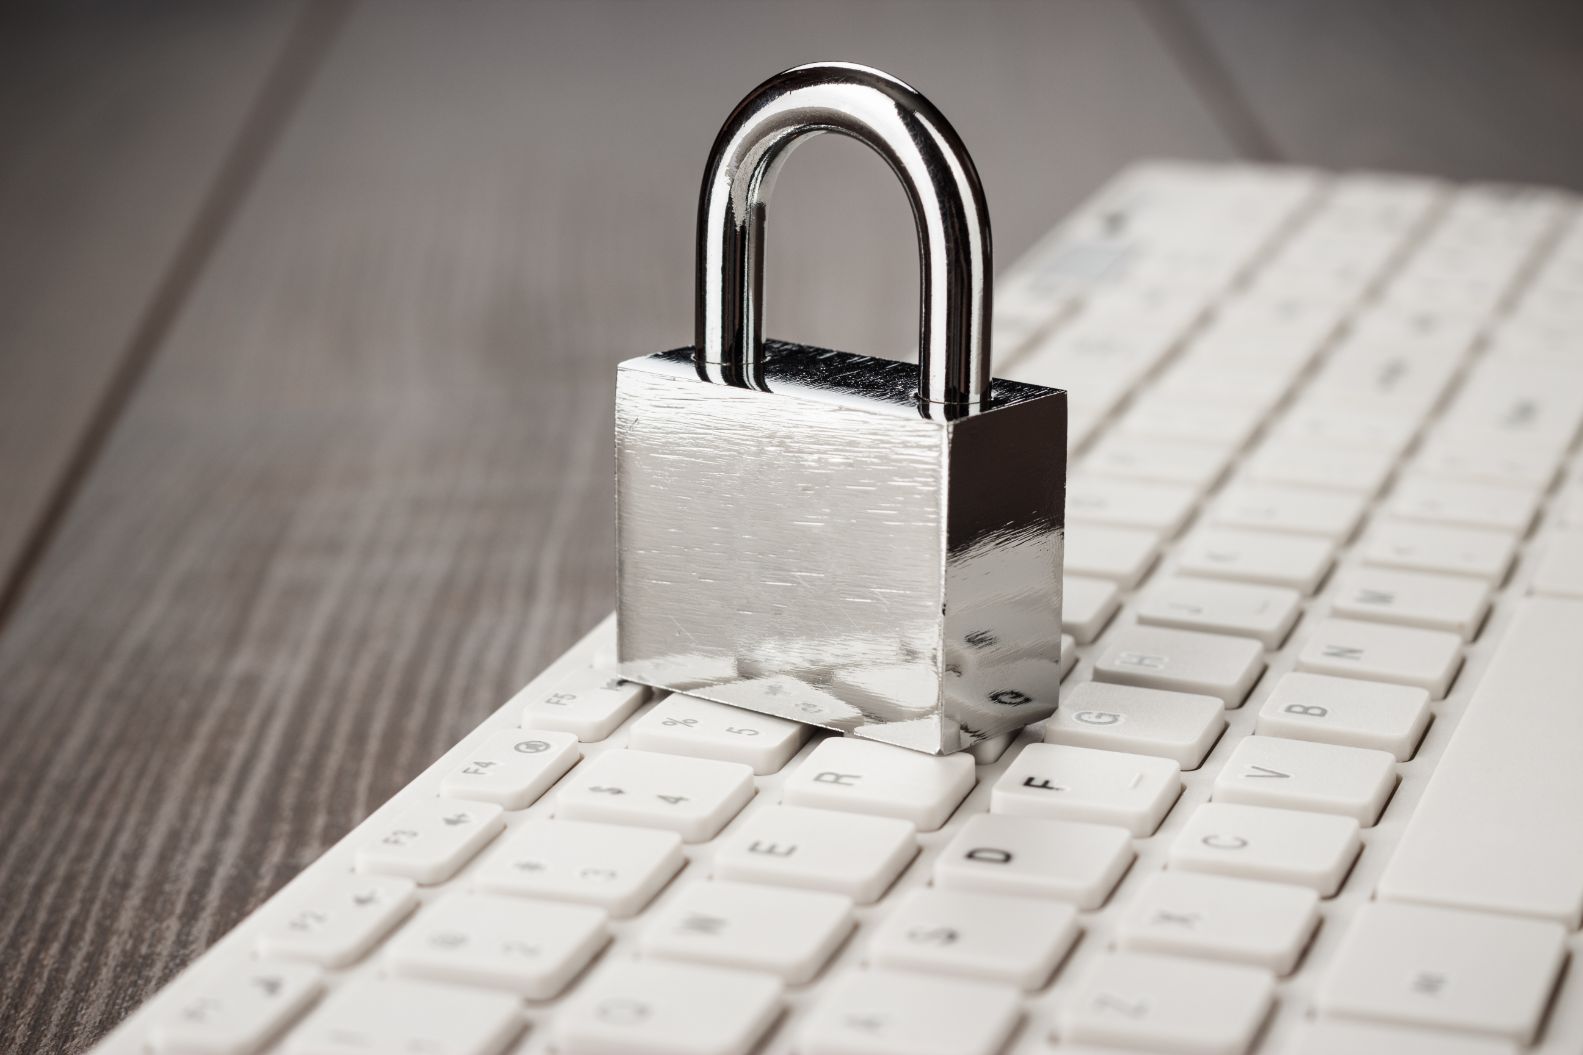 How Your Data is Easily Intercepted if without Encryption